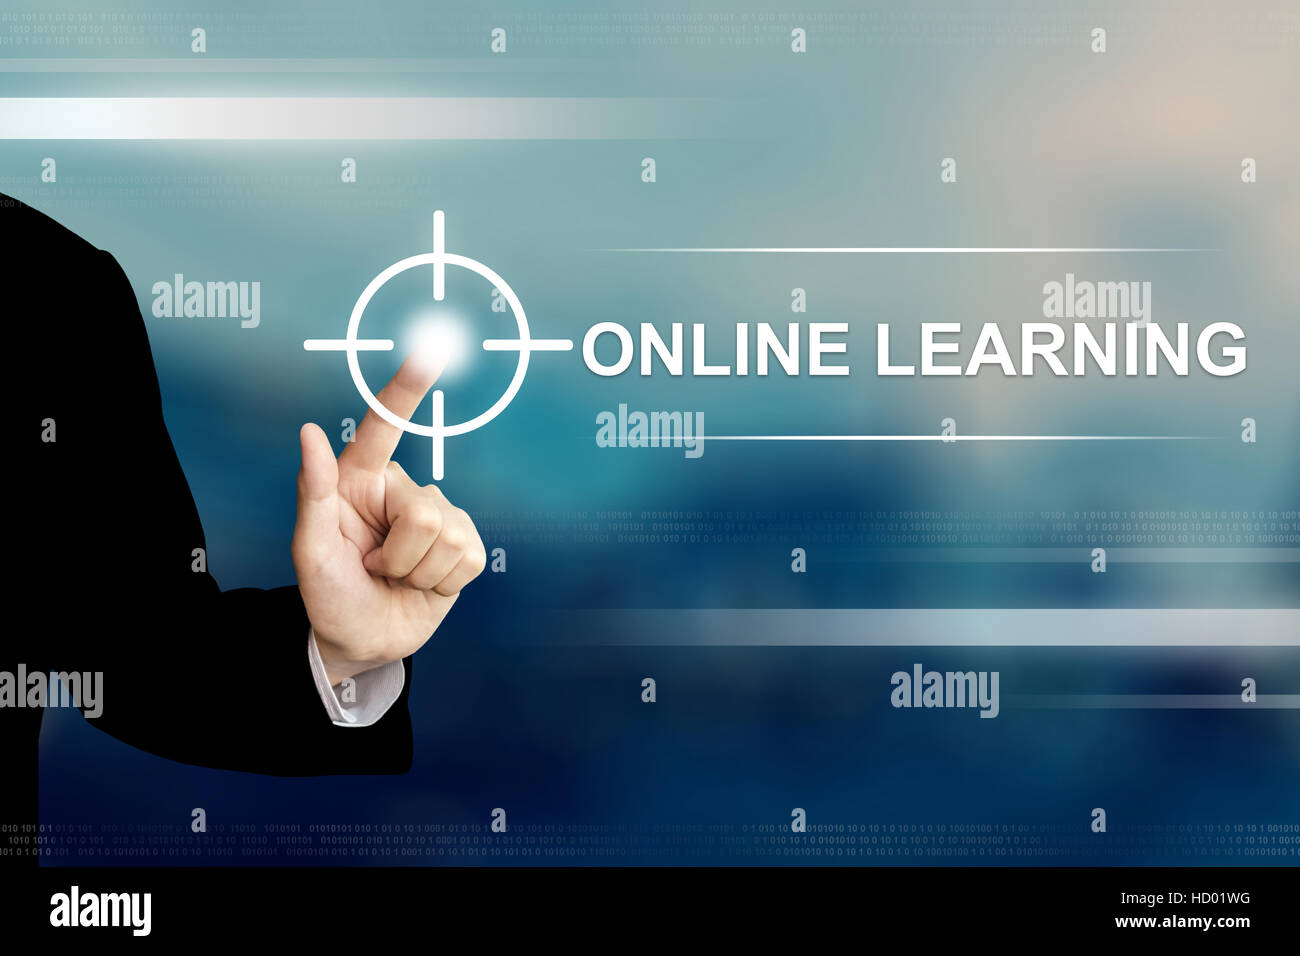 business hand pushing online learning button on a touch screen interface Stock Photo